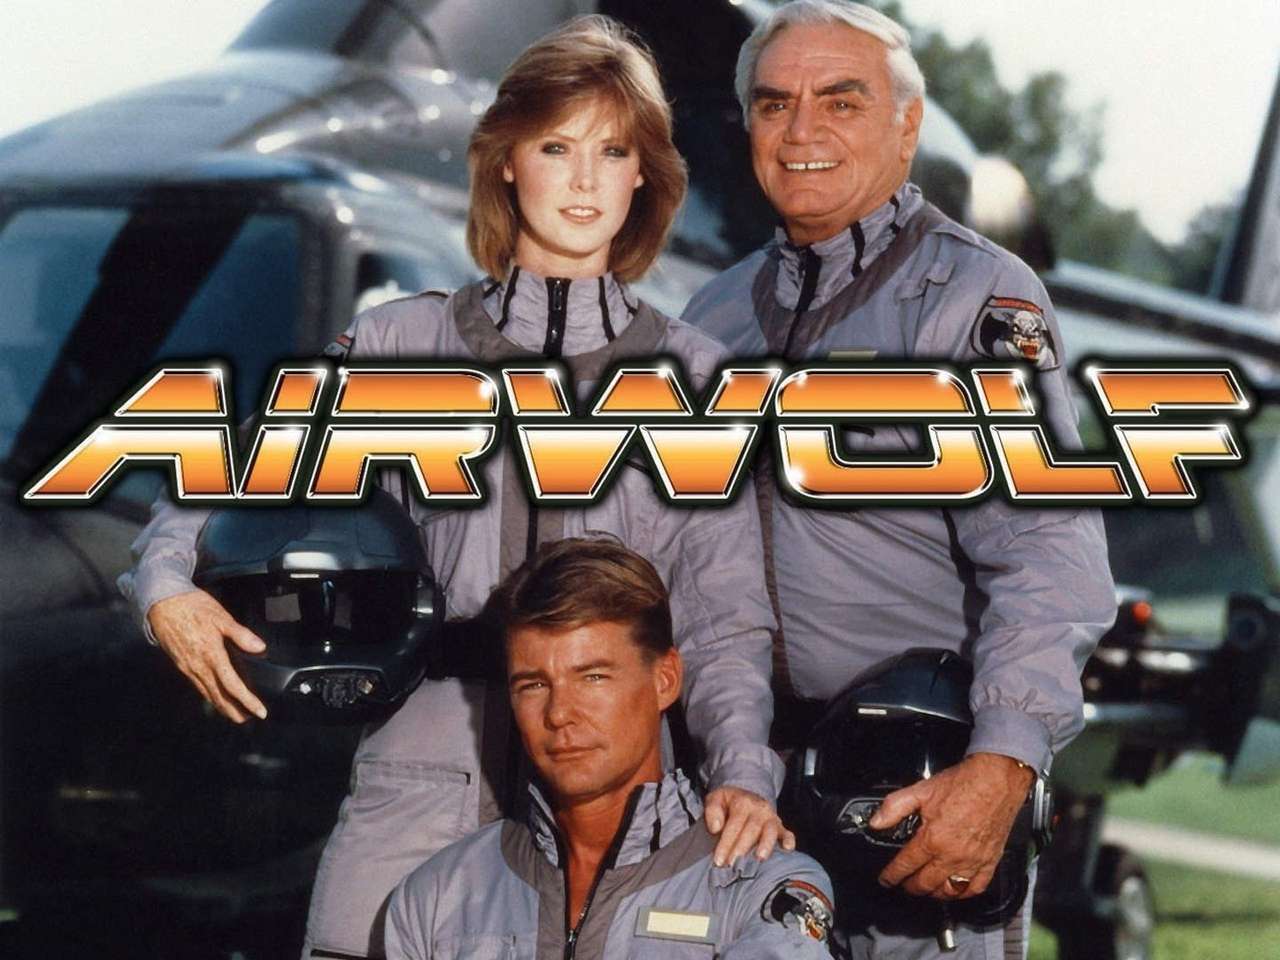 Airwolf Poster puzzle online from photo